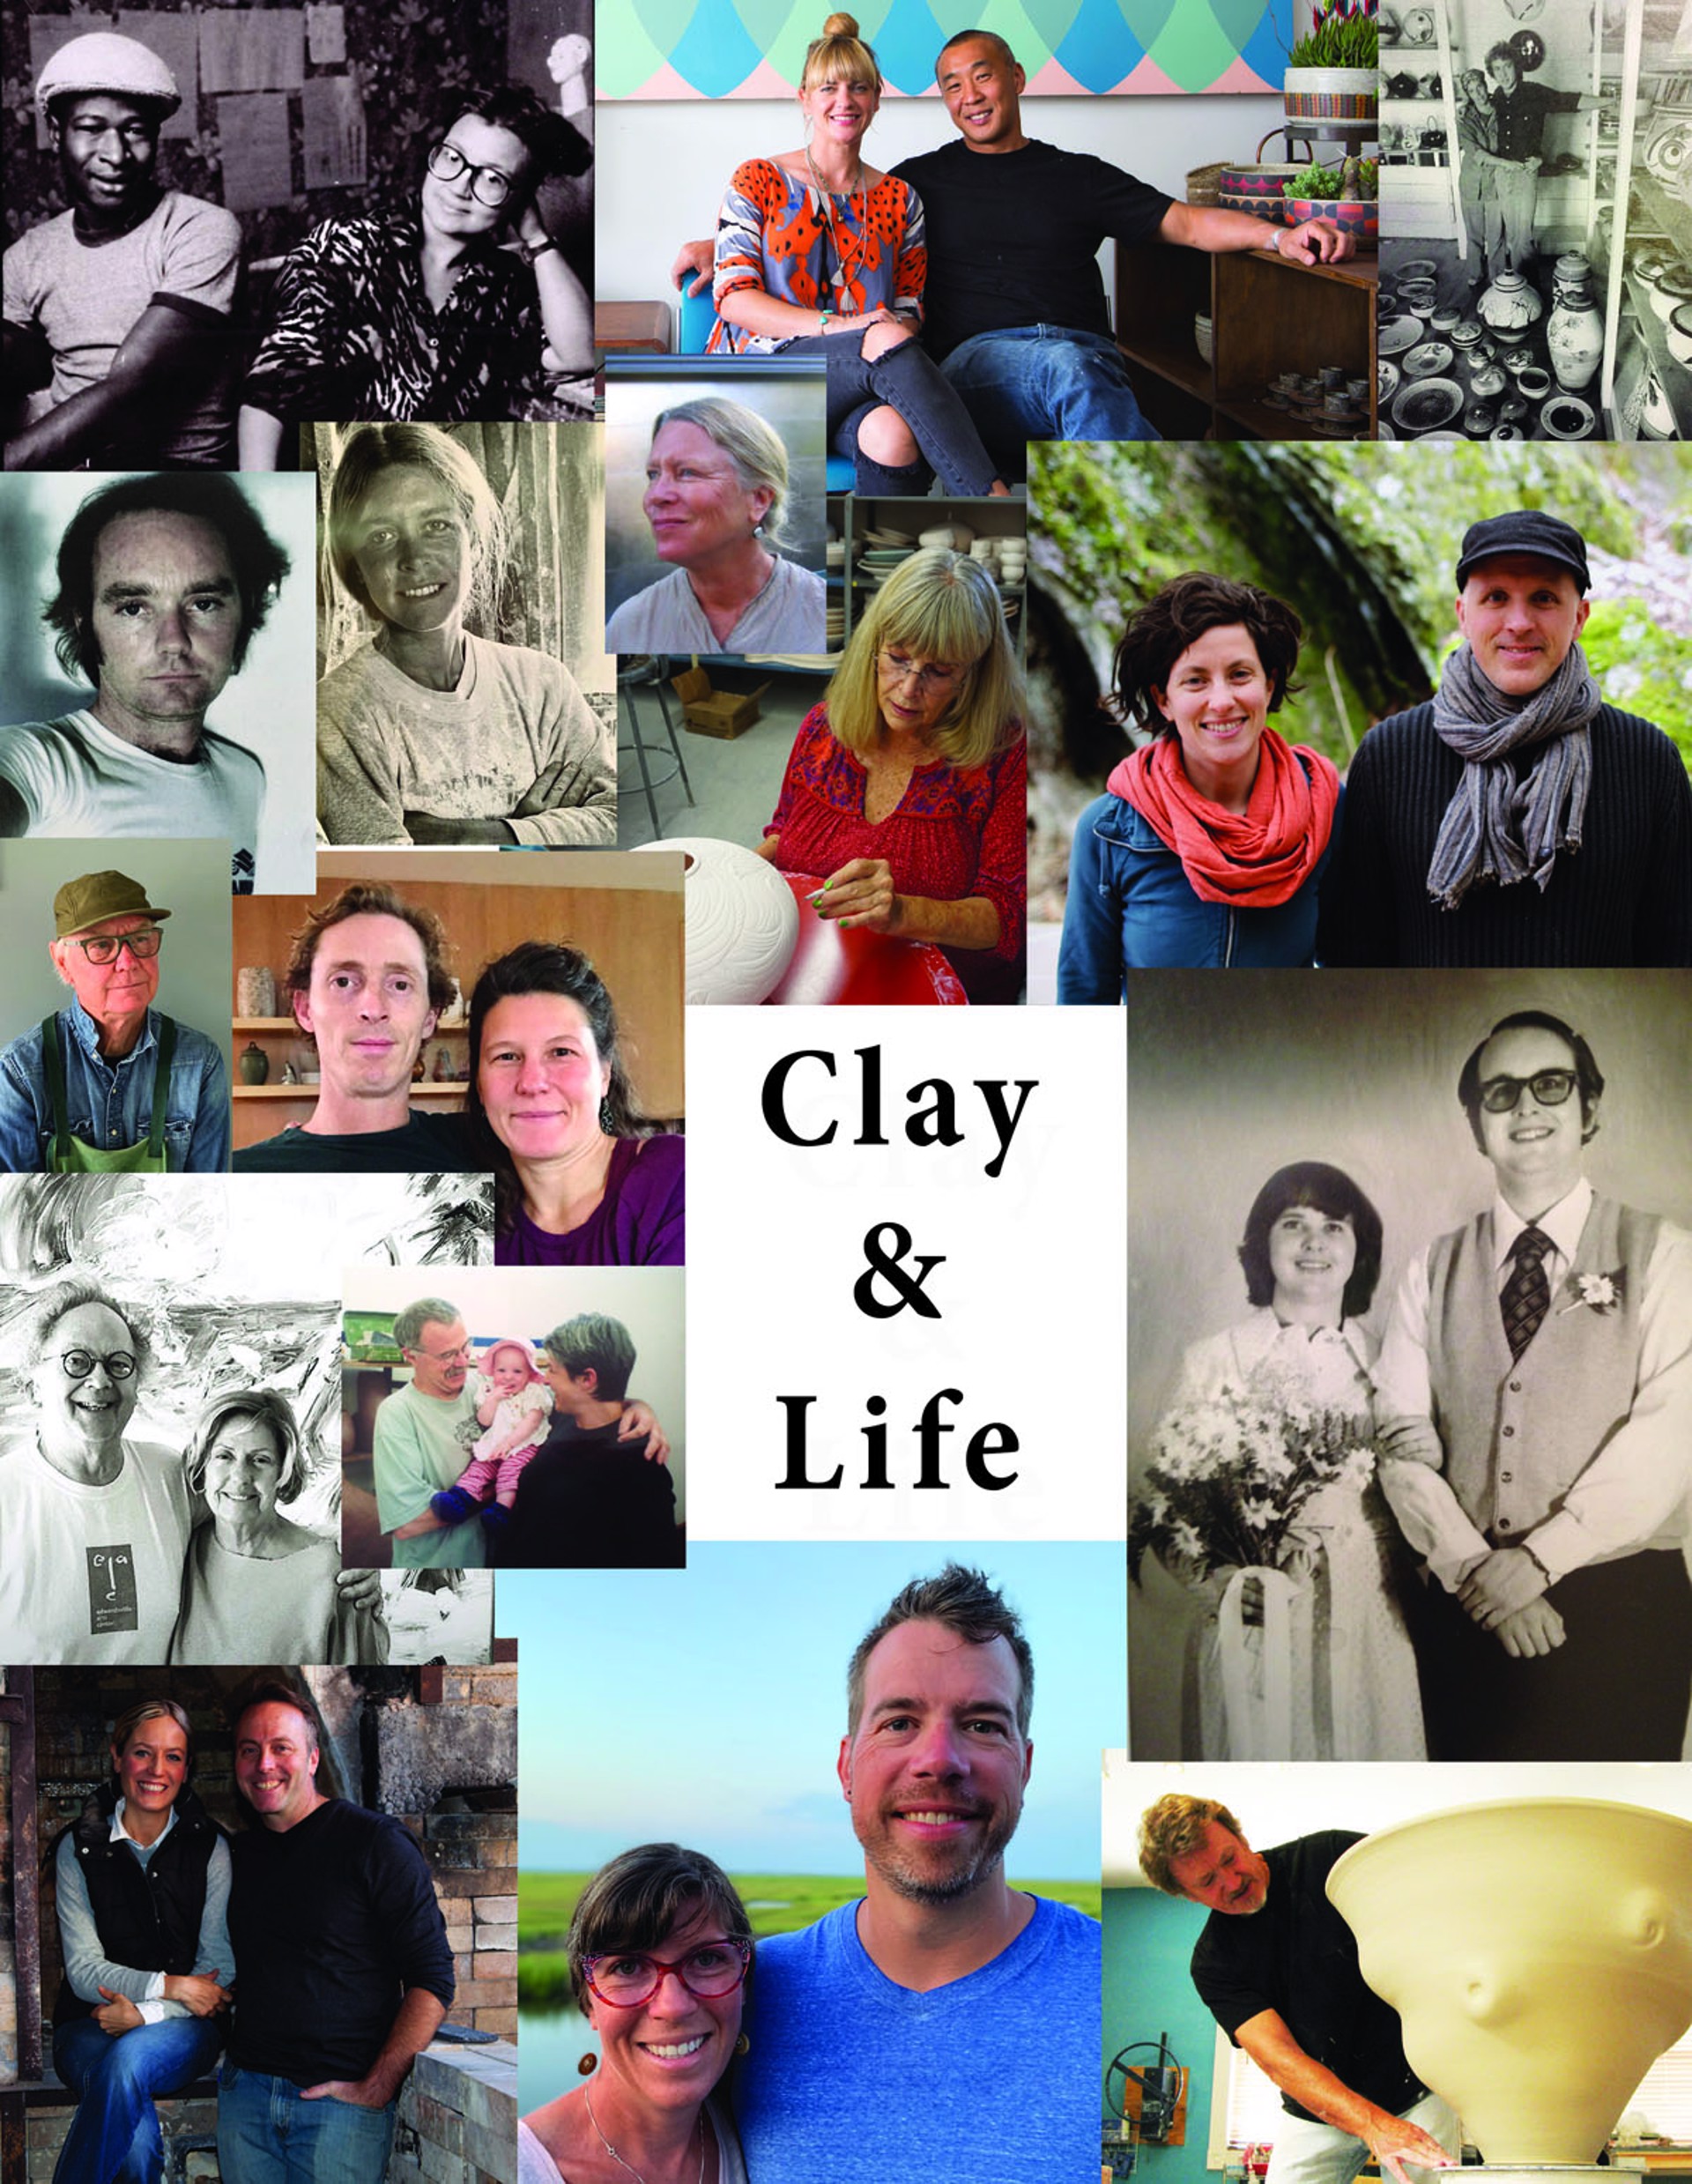 Clay and Life by Eutectic Gallery